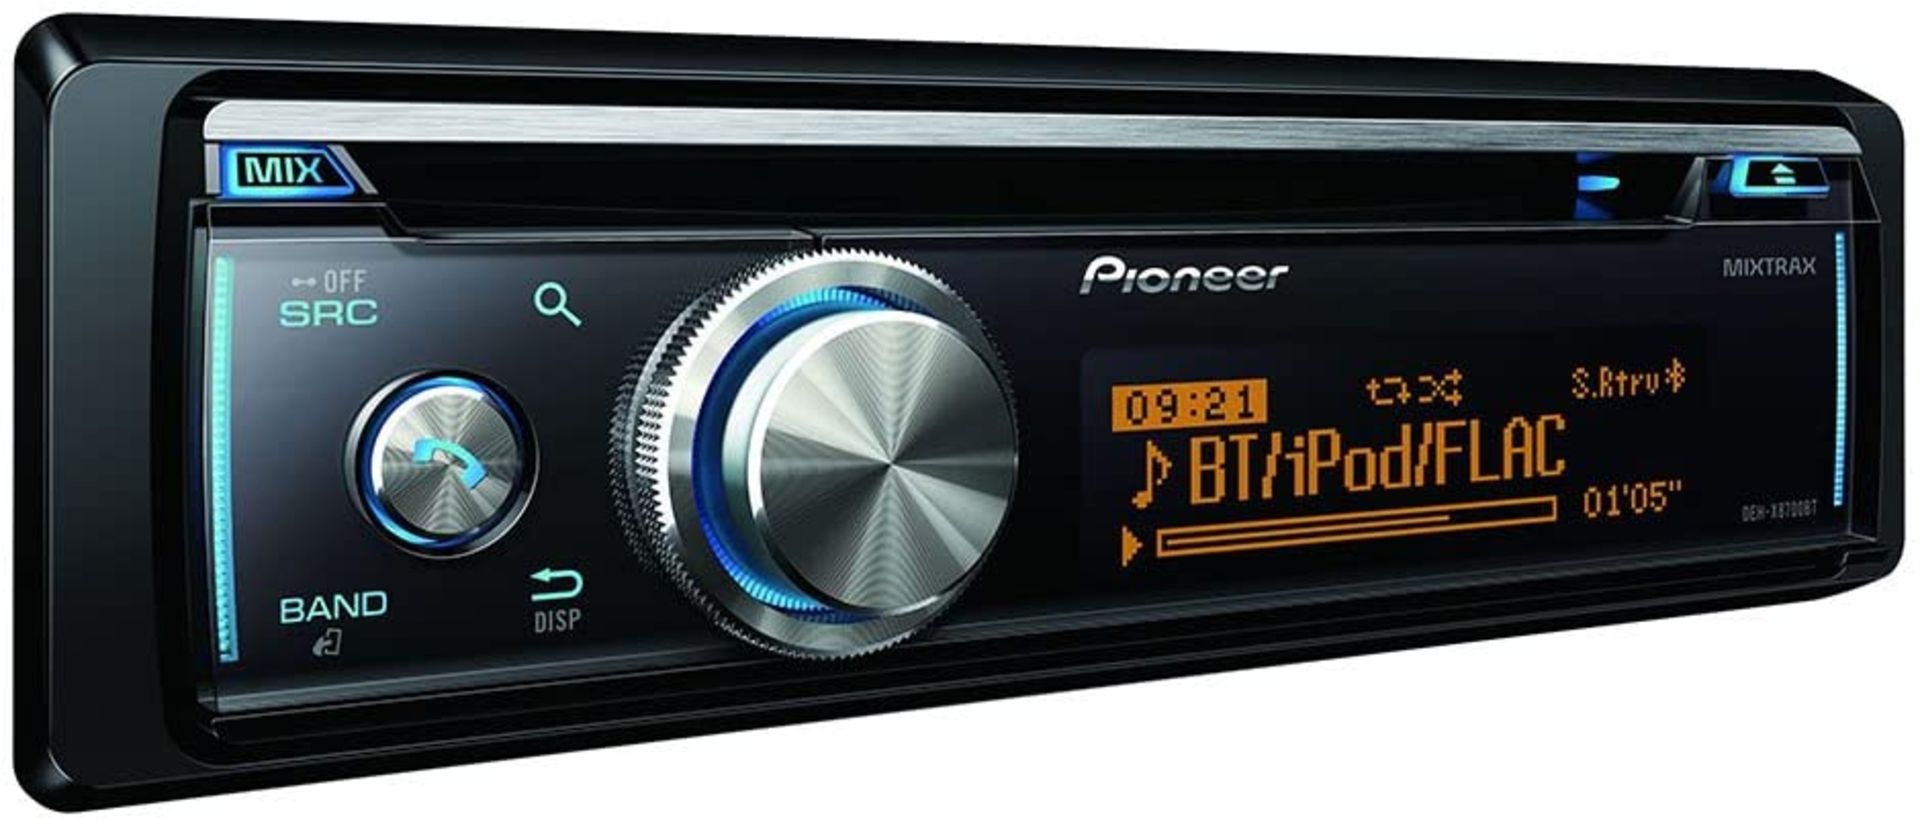 (21) 1 x Grade B - Pioneer DEH-X8700BT Bluetooth car stereo USB/AUX input for iPhone,iPod,Andro...